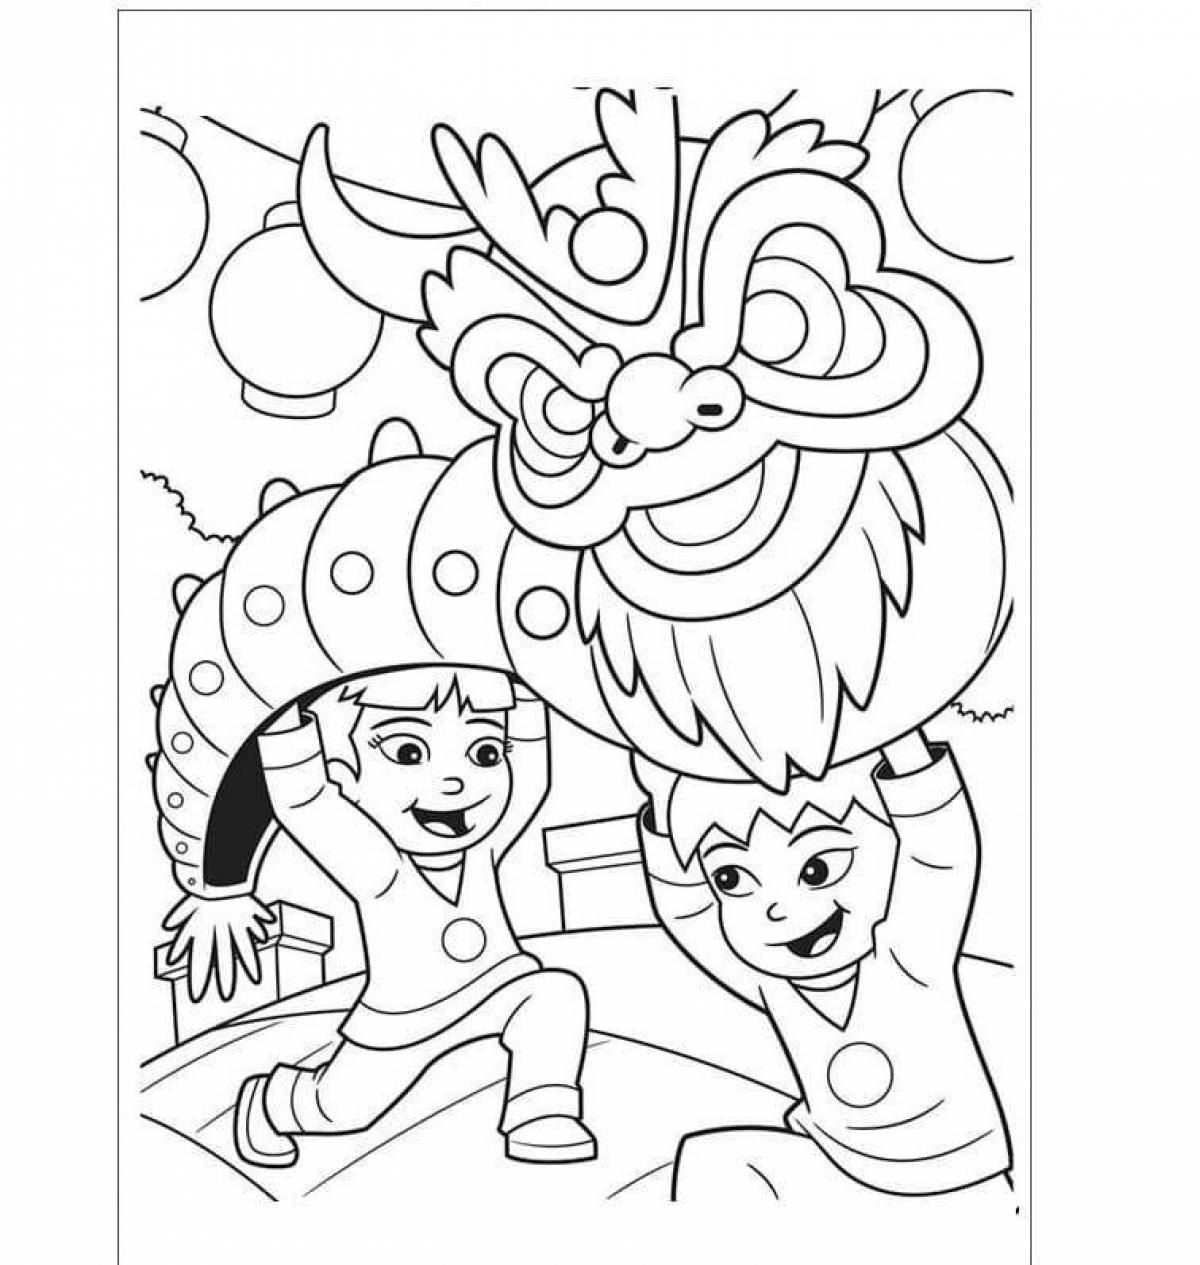 Adorable Chinese New Year coloring book